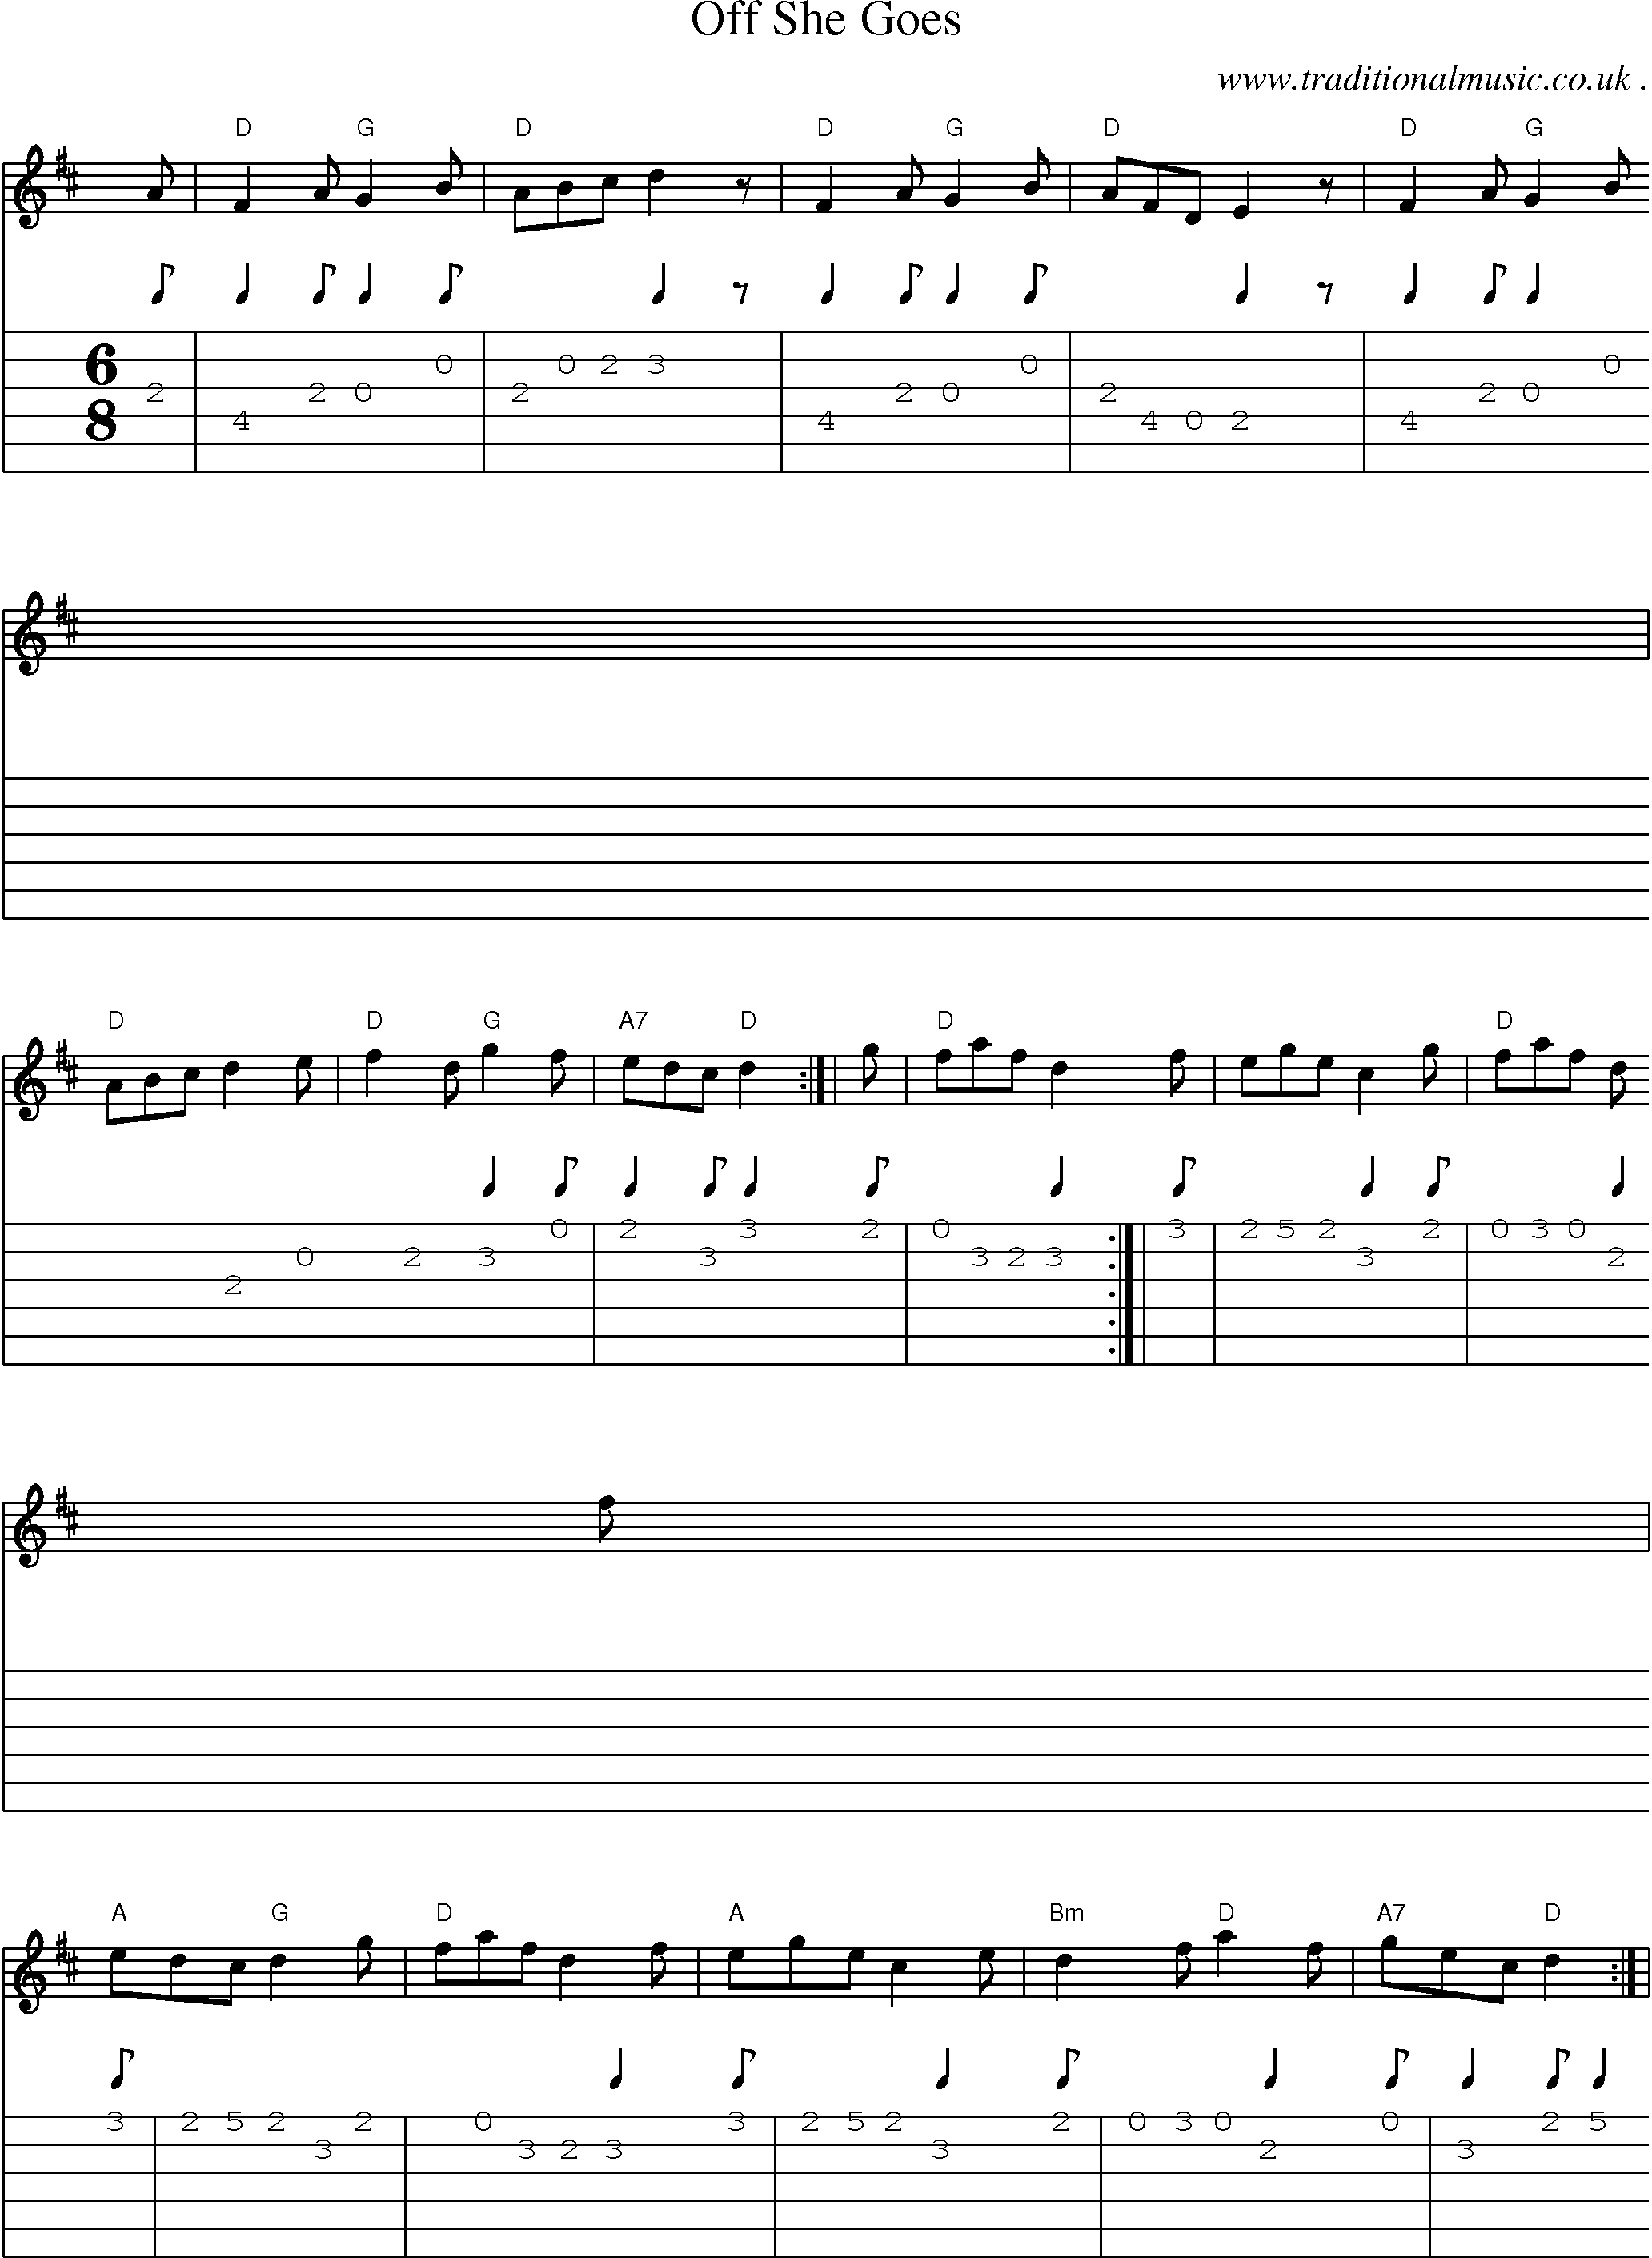 Sheet-music  score, Chords and Guitar Tabs for Off She Goes